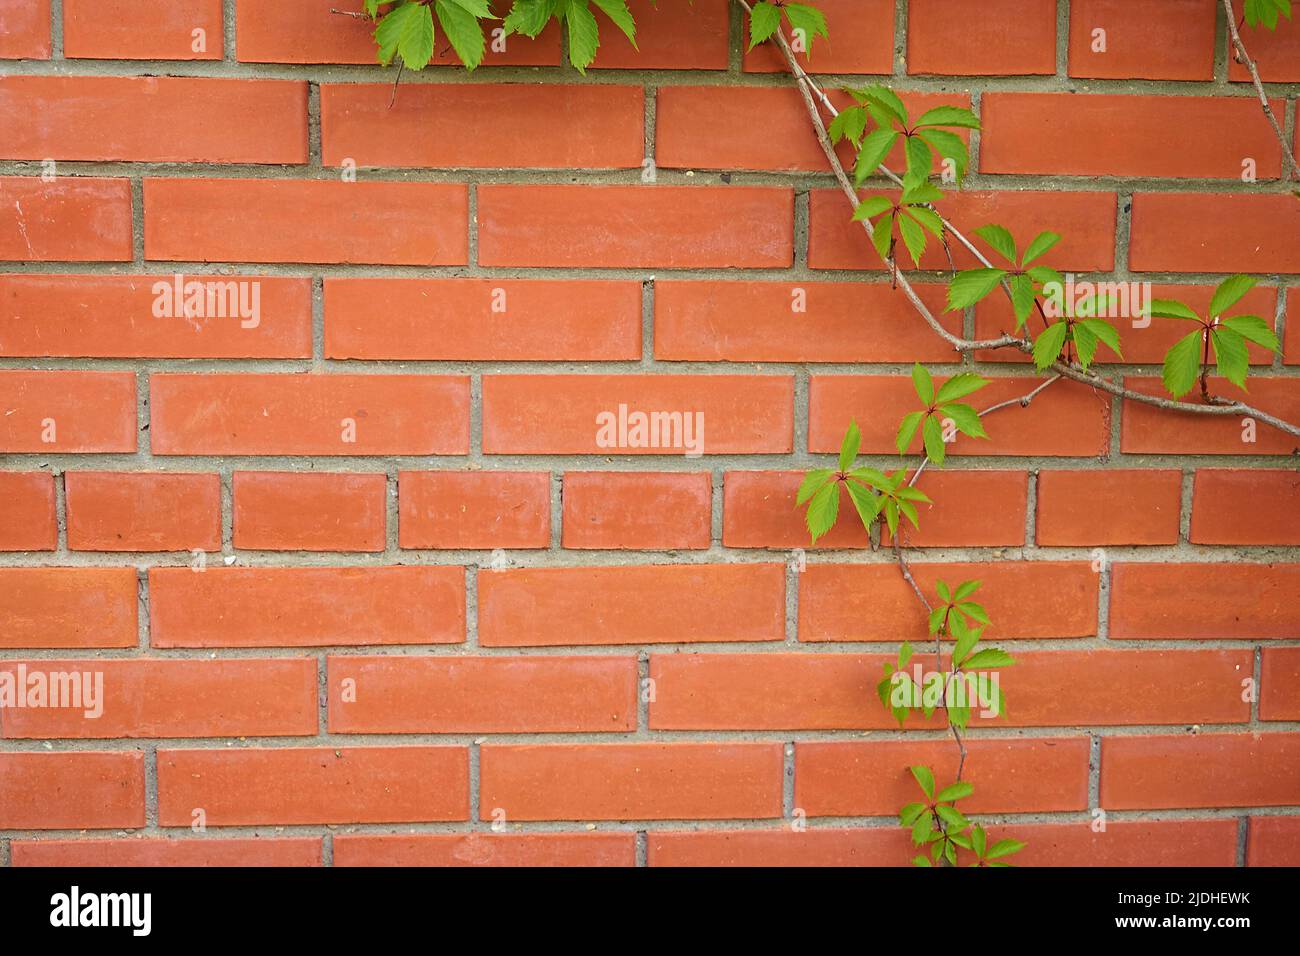 Parthenocissus quinquefolia. A red brick wall with a branch of maiden grapes Stock Photo